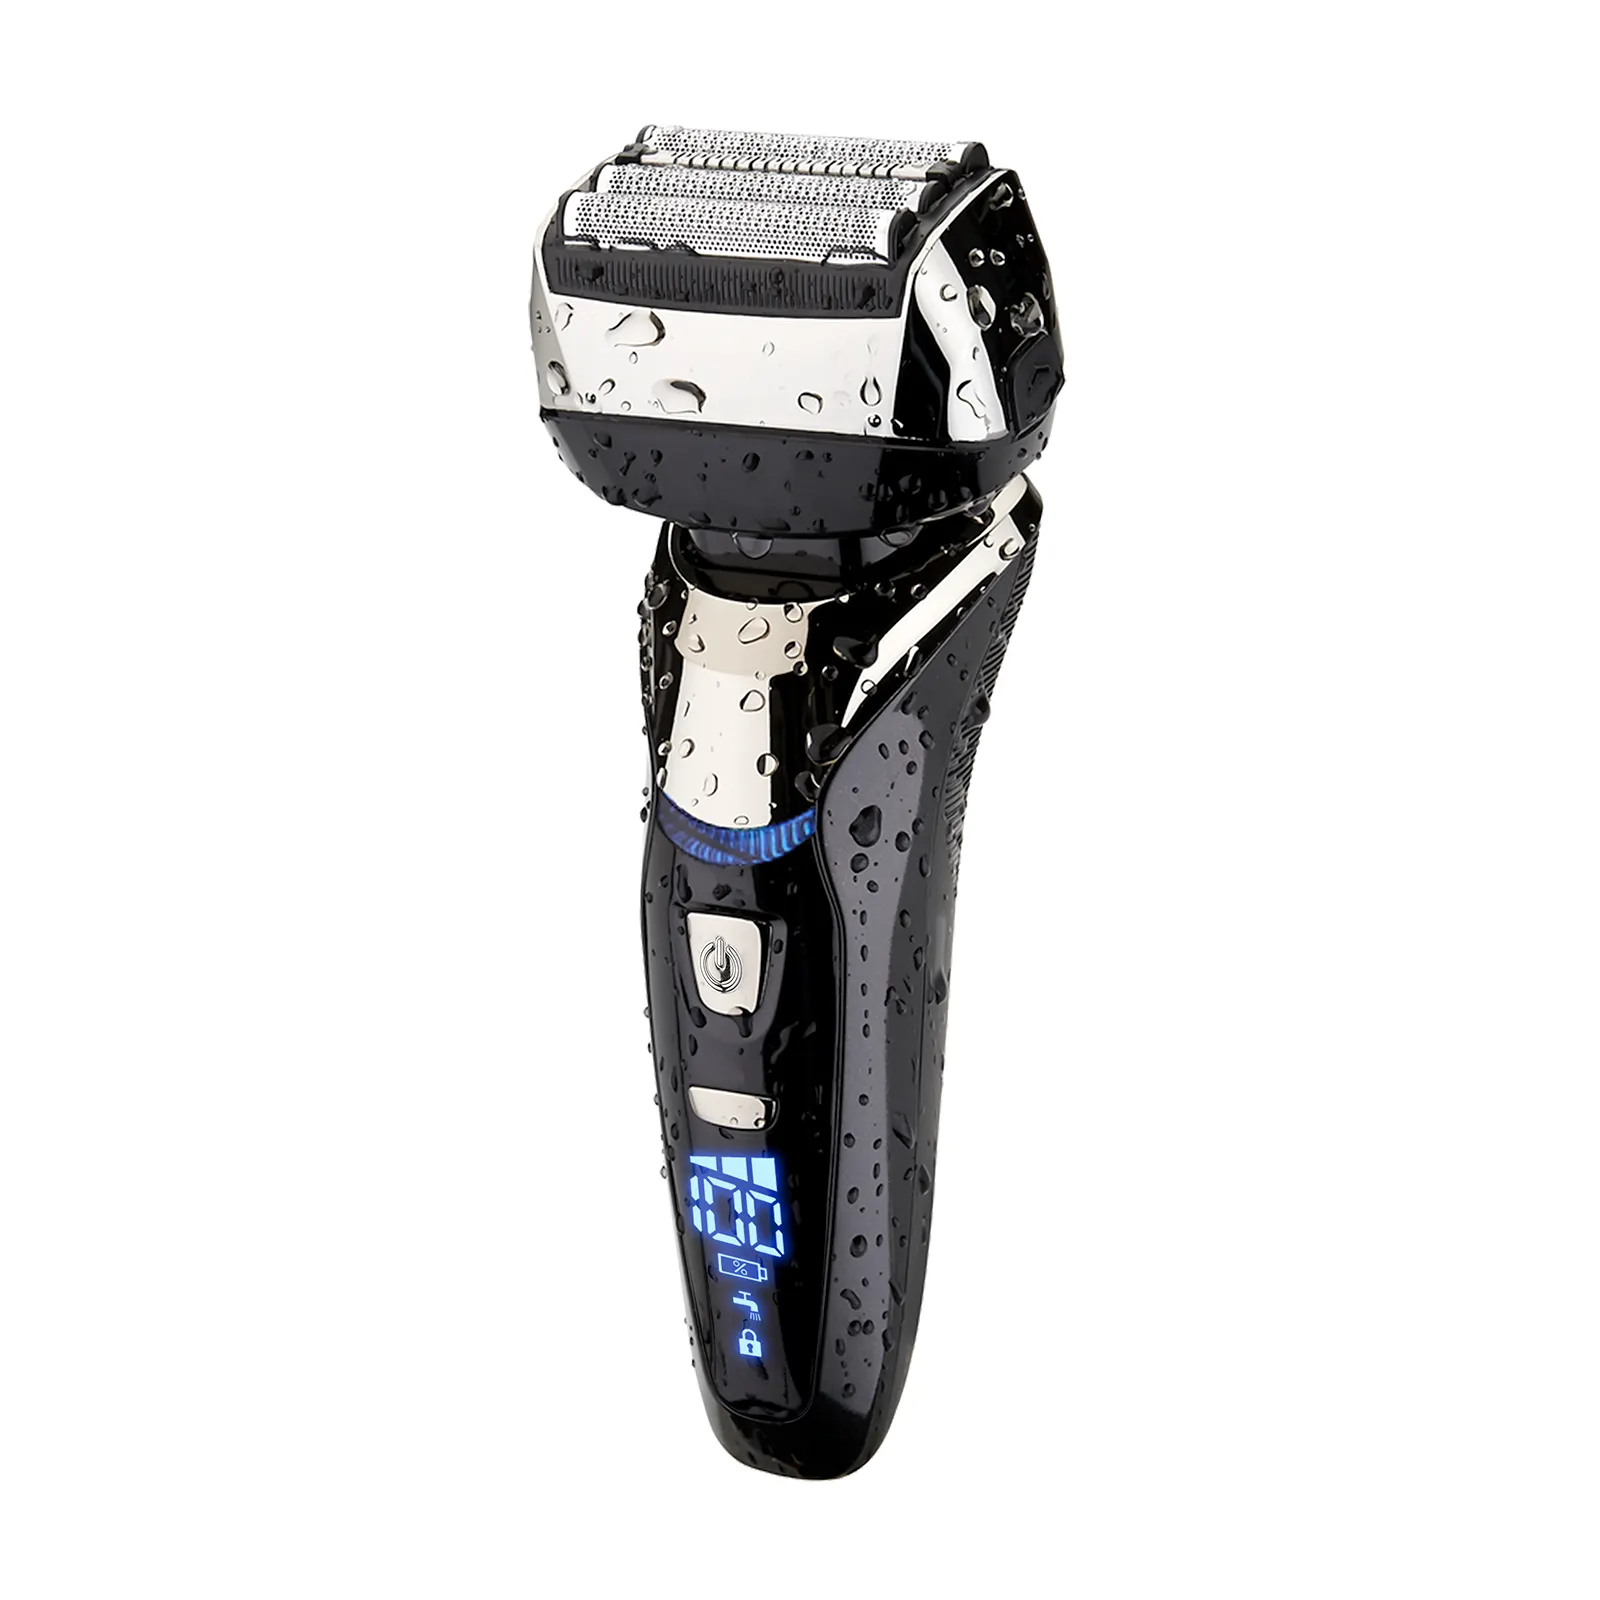 Reciprocating foil 4 blade IPX7 Wet And Dry Mens Electric Shaver for homeuse